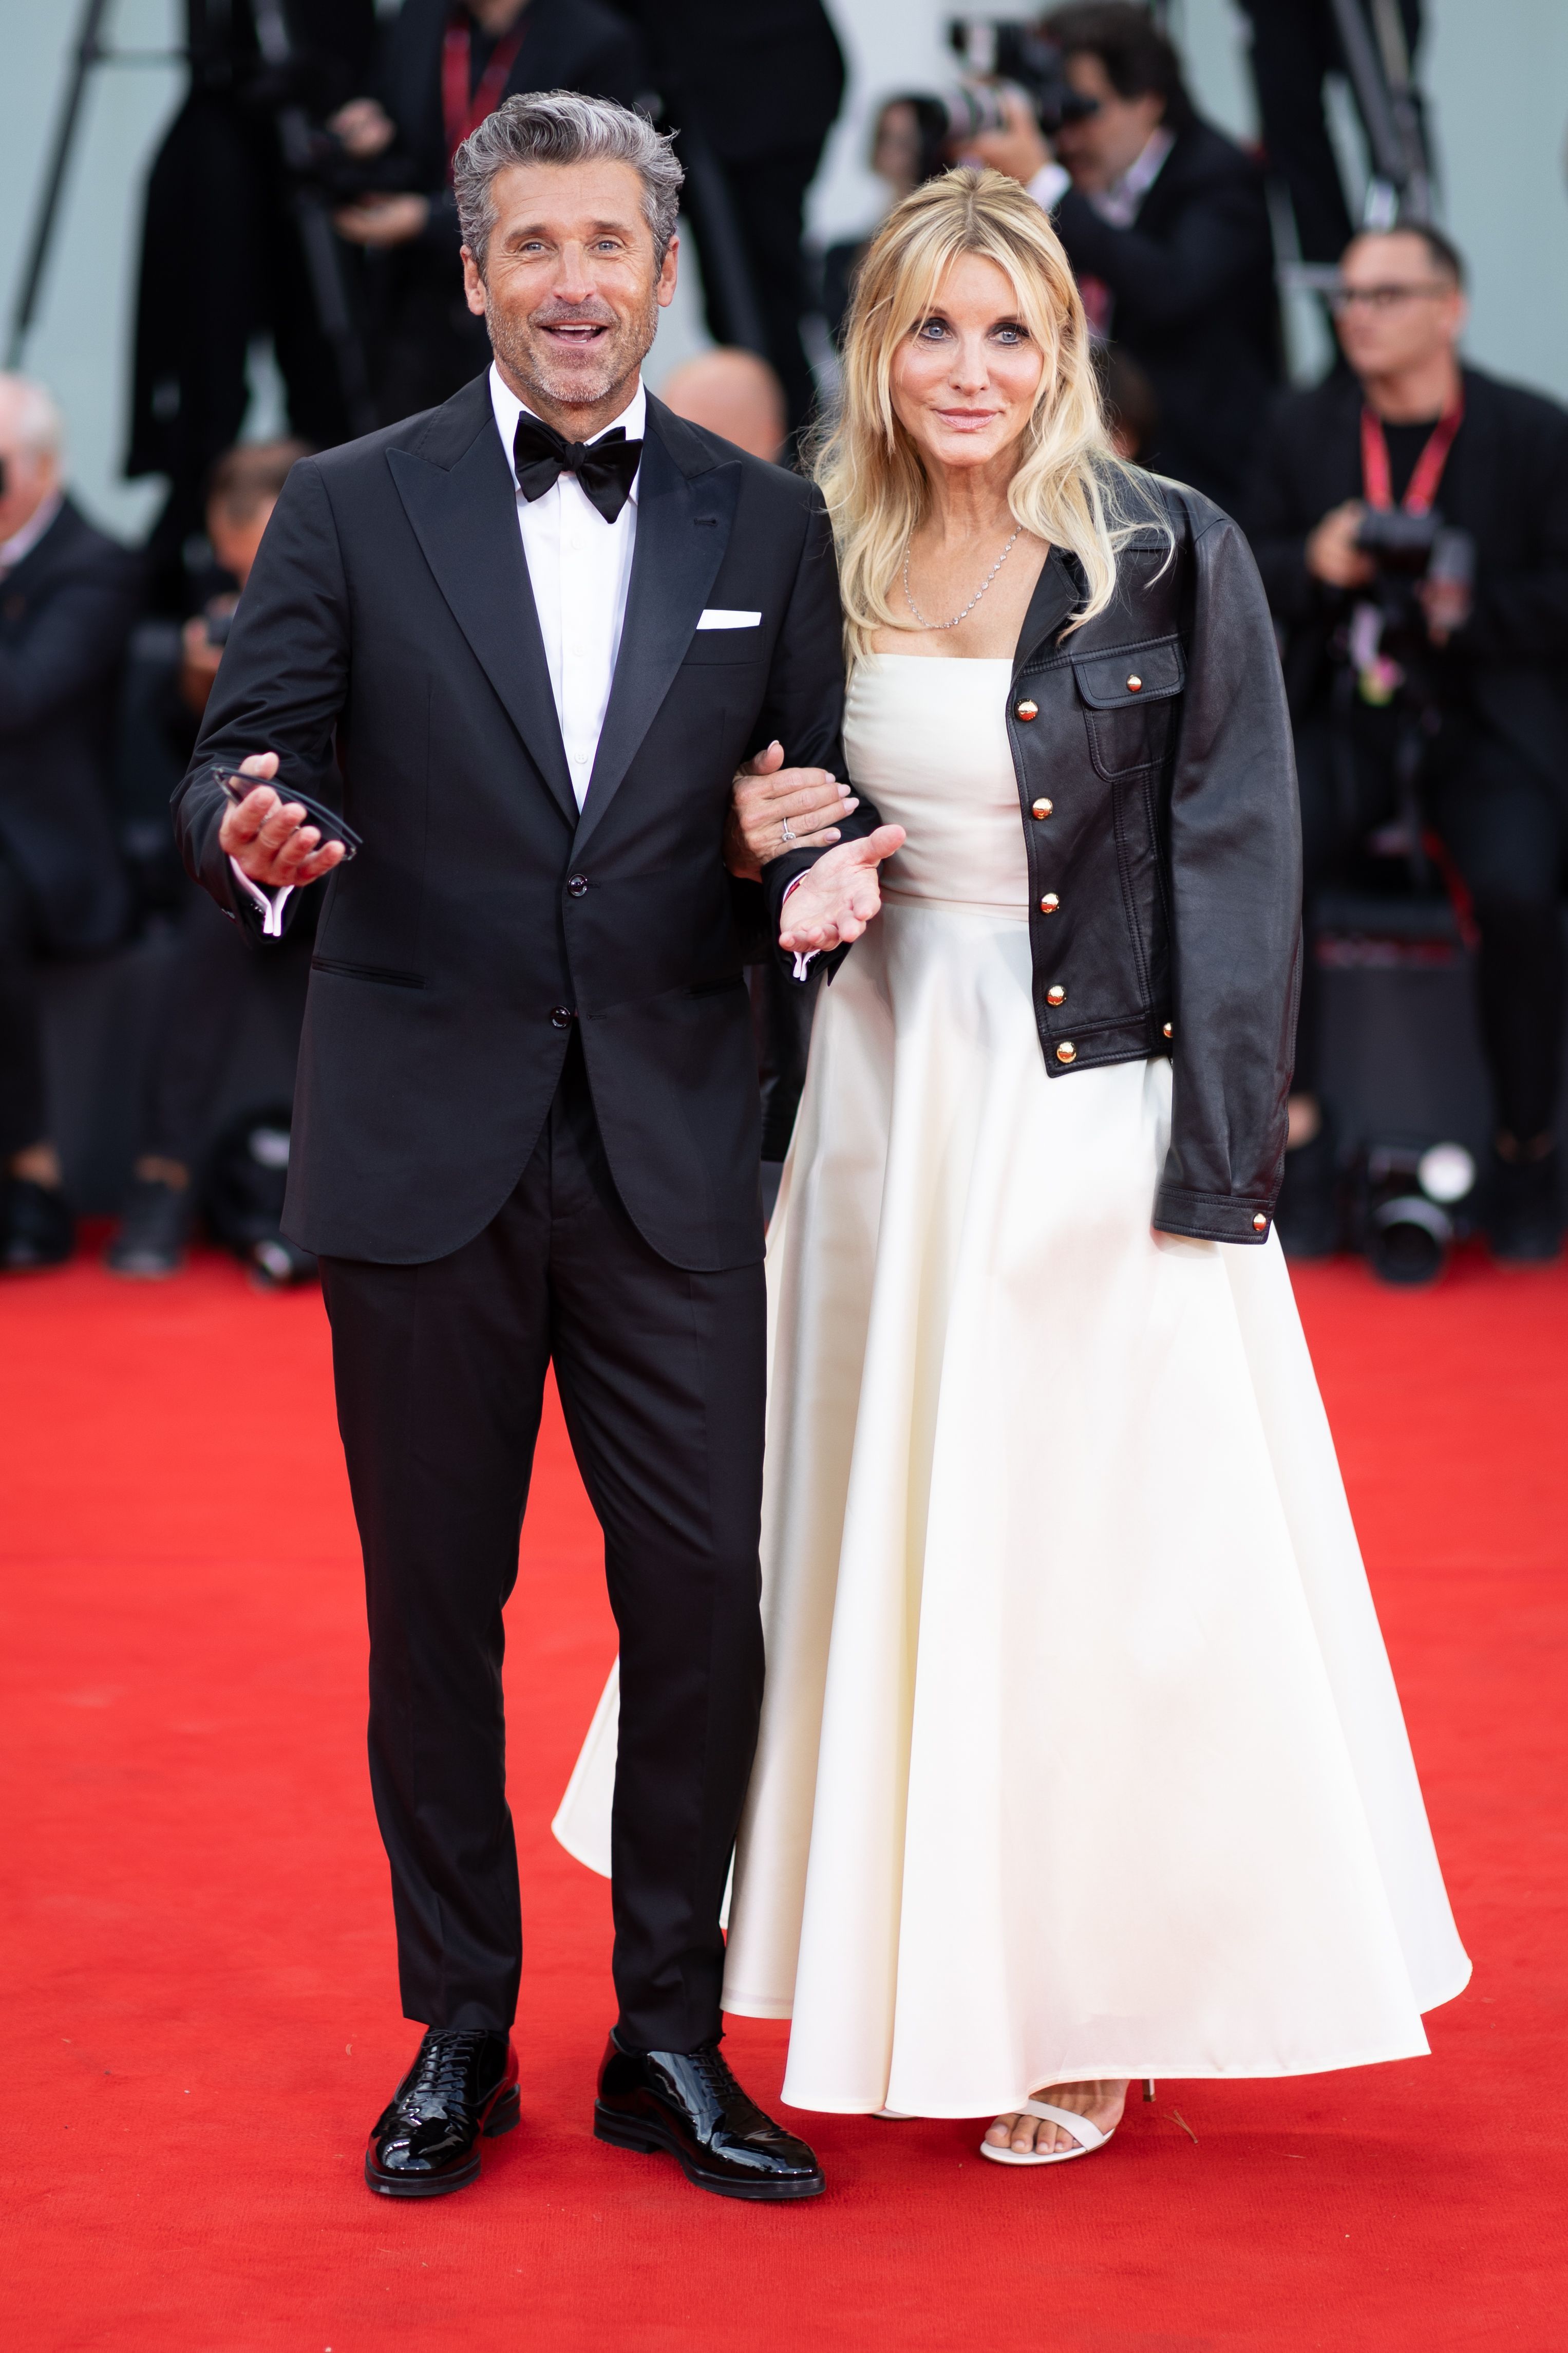 Patrick Dempsey and Jillian Fink at the 80th Venice International Film Festival in 2023 | Source: Getty Images